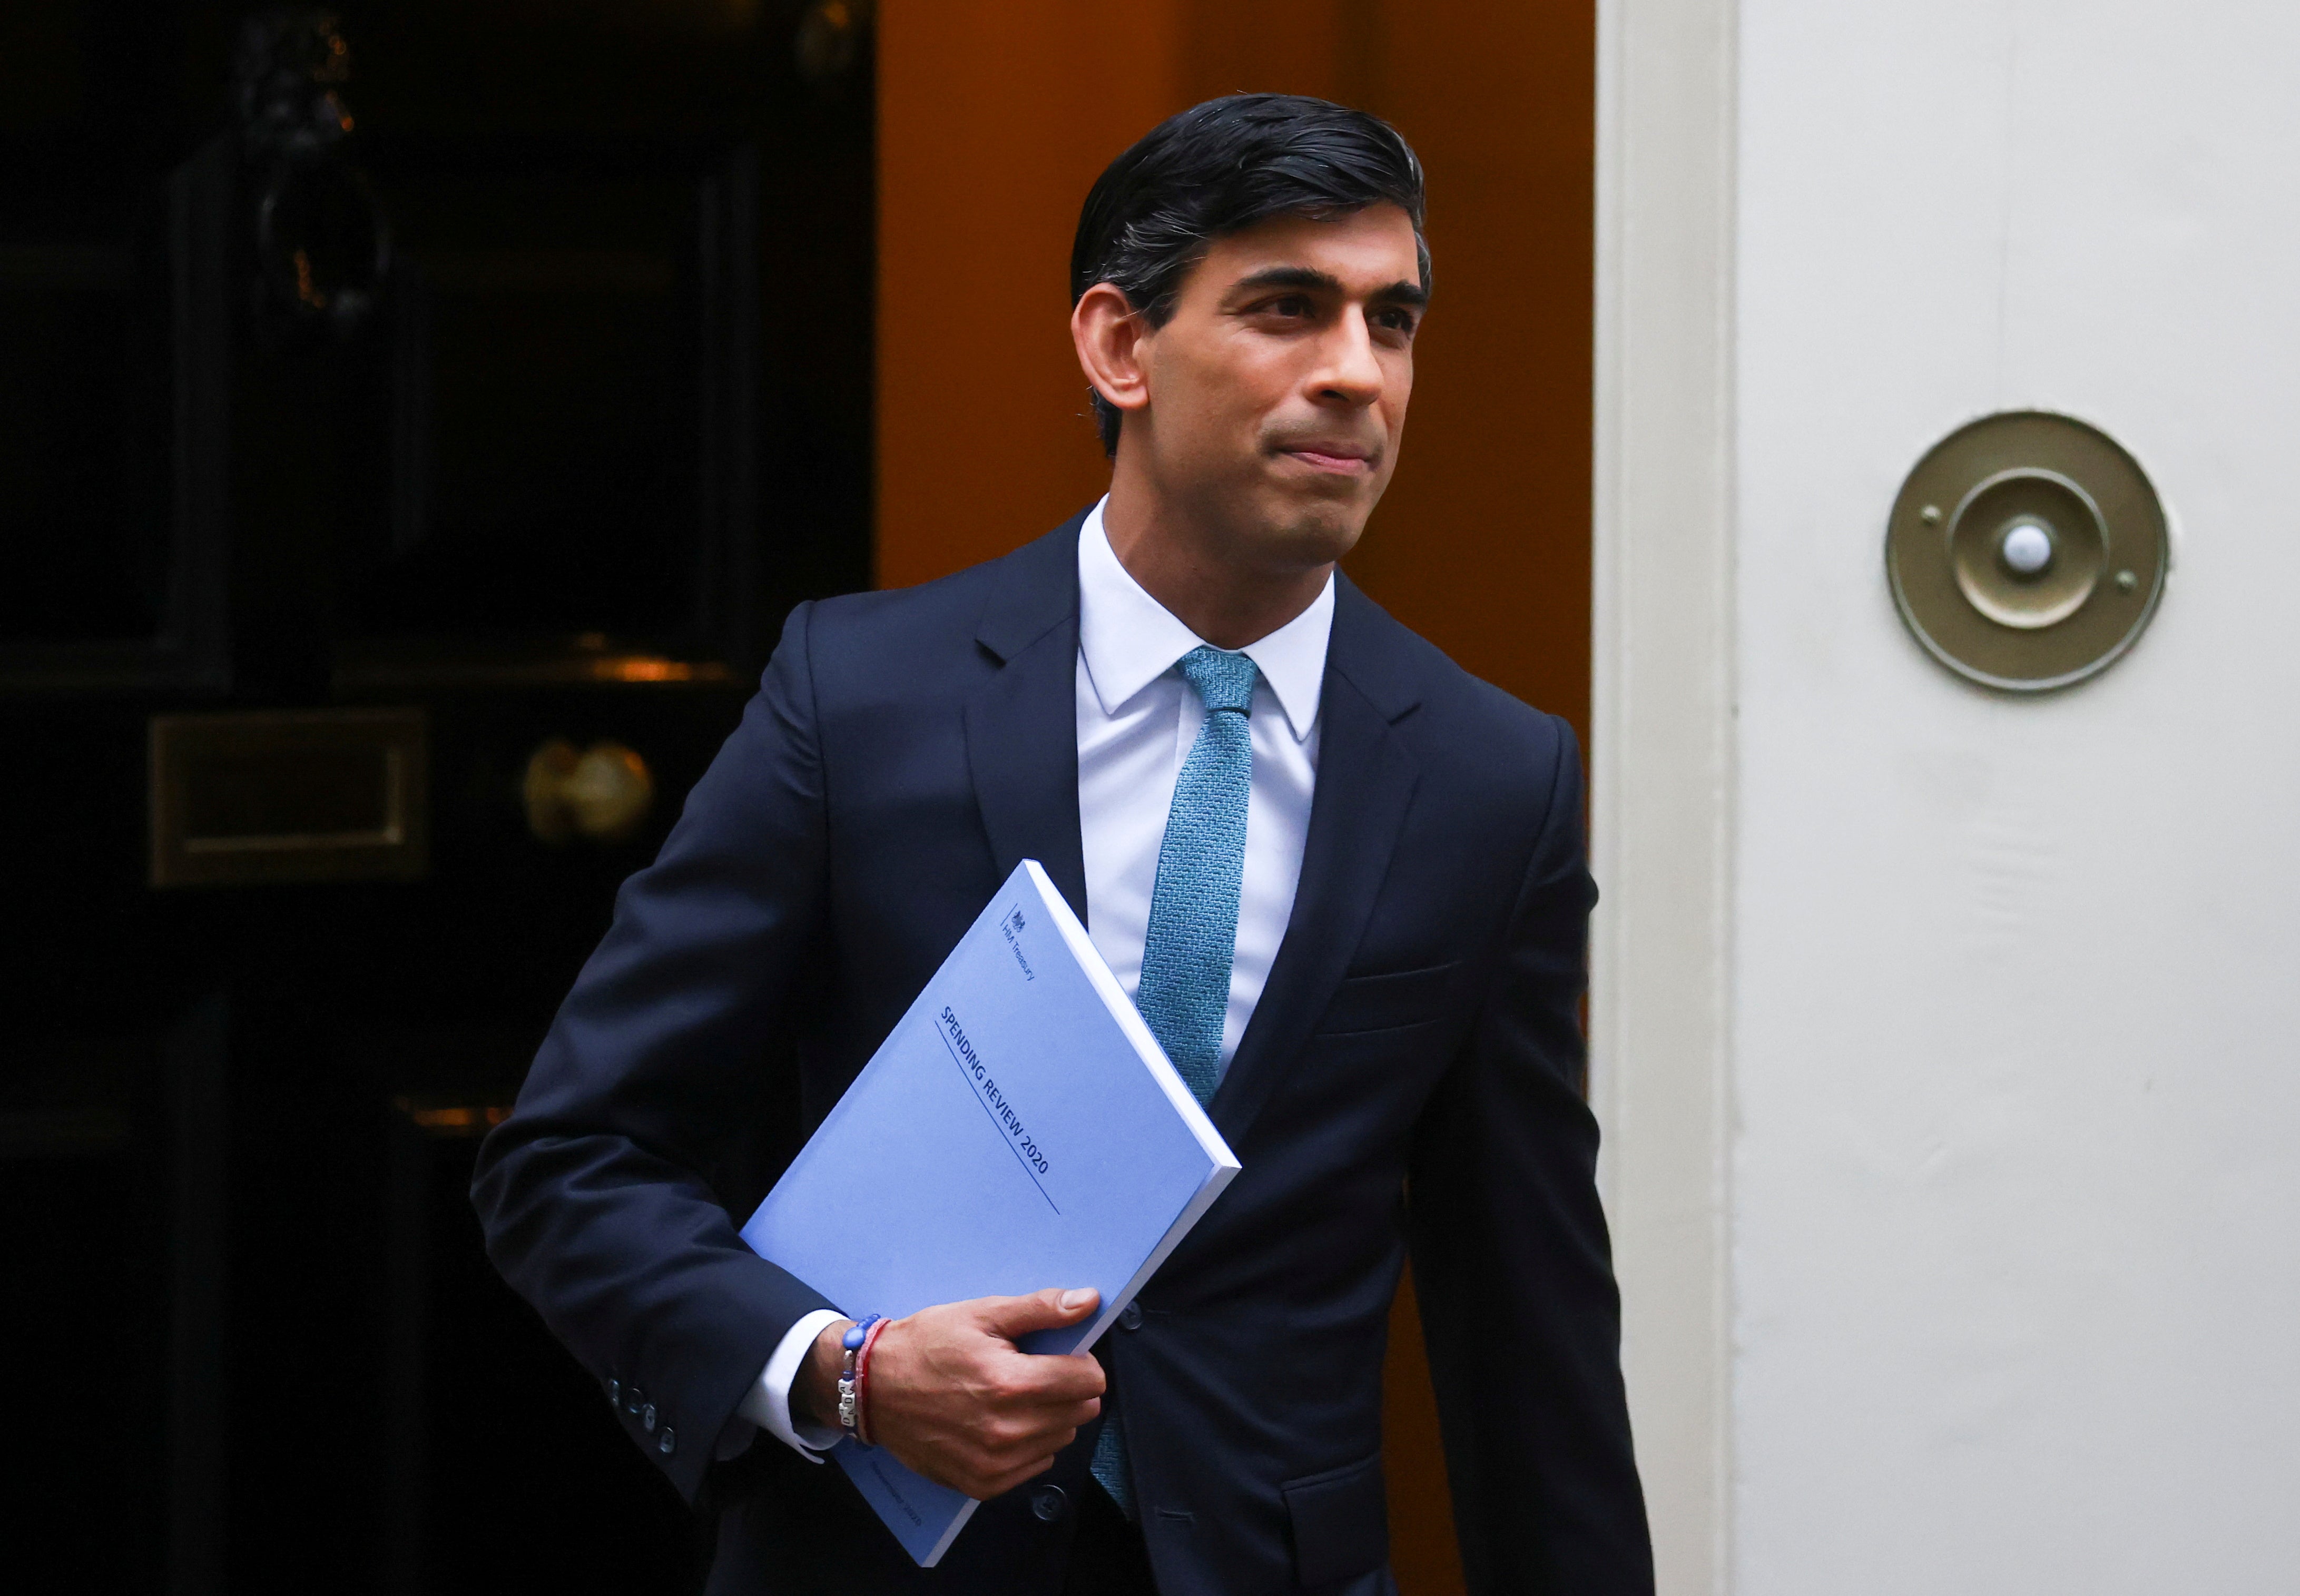 The chancellor, Rishi Sunak, will be forced to extend some furlough support and to back off from benefit cuts